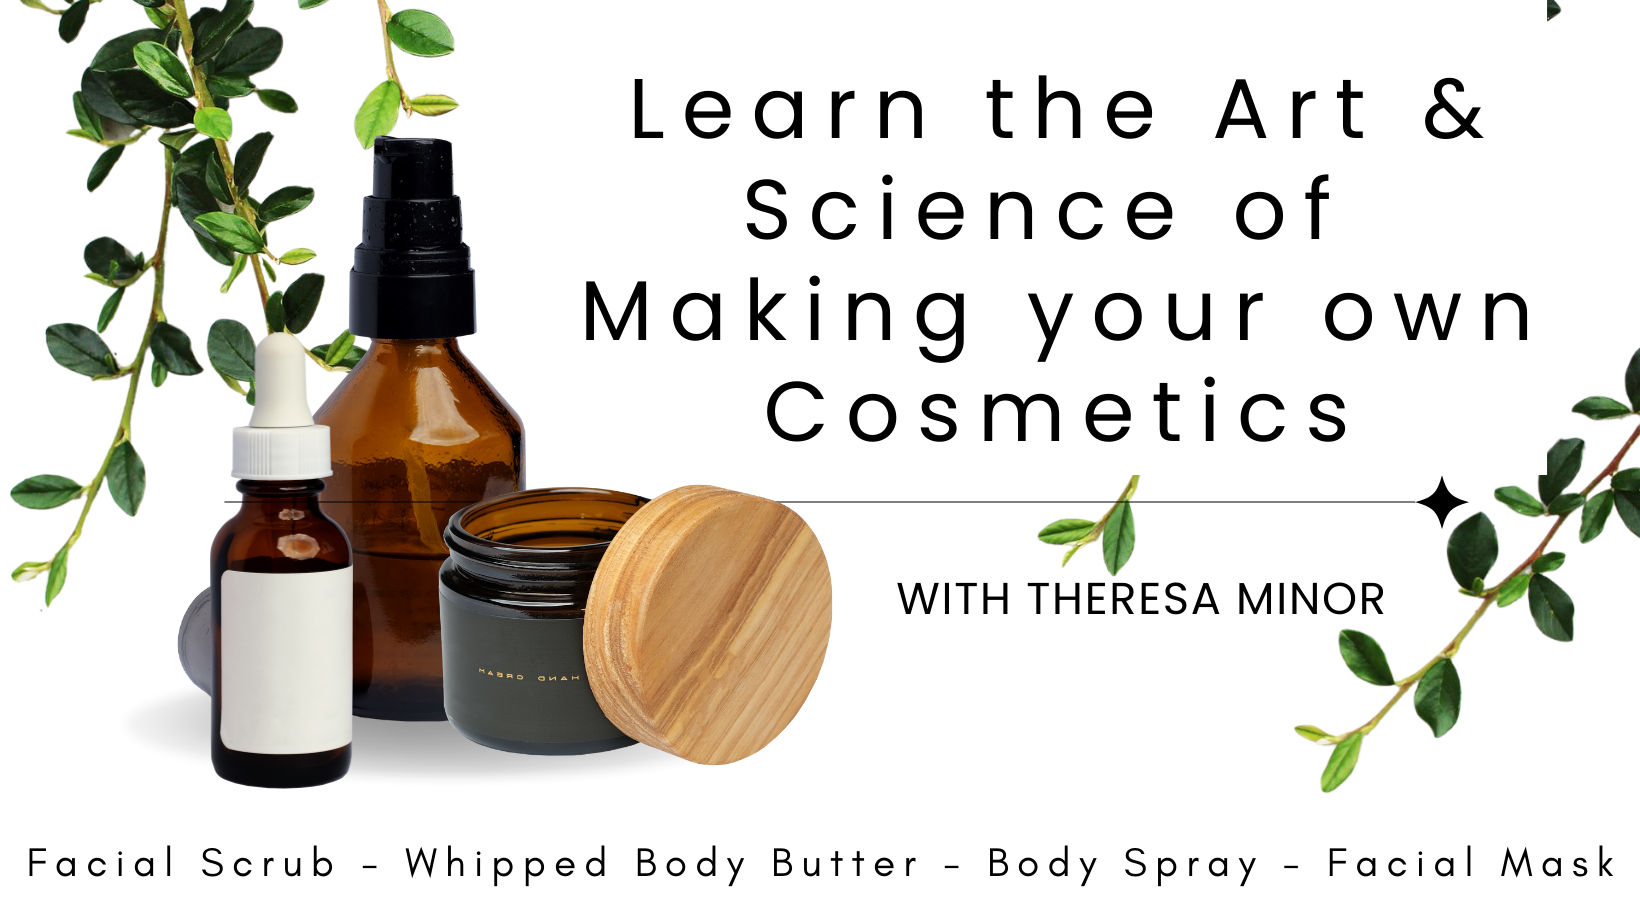 Learn the Art & Science of Making Your Own Cosmetics